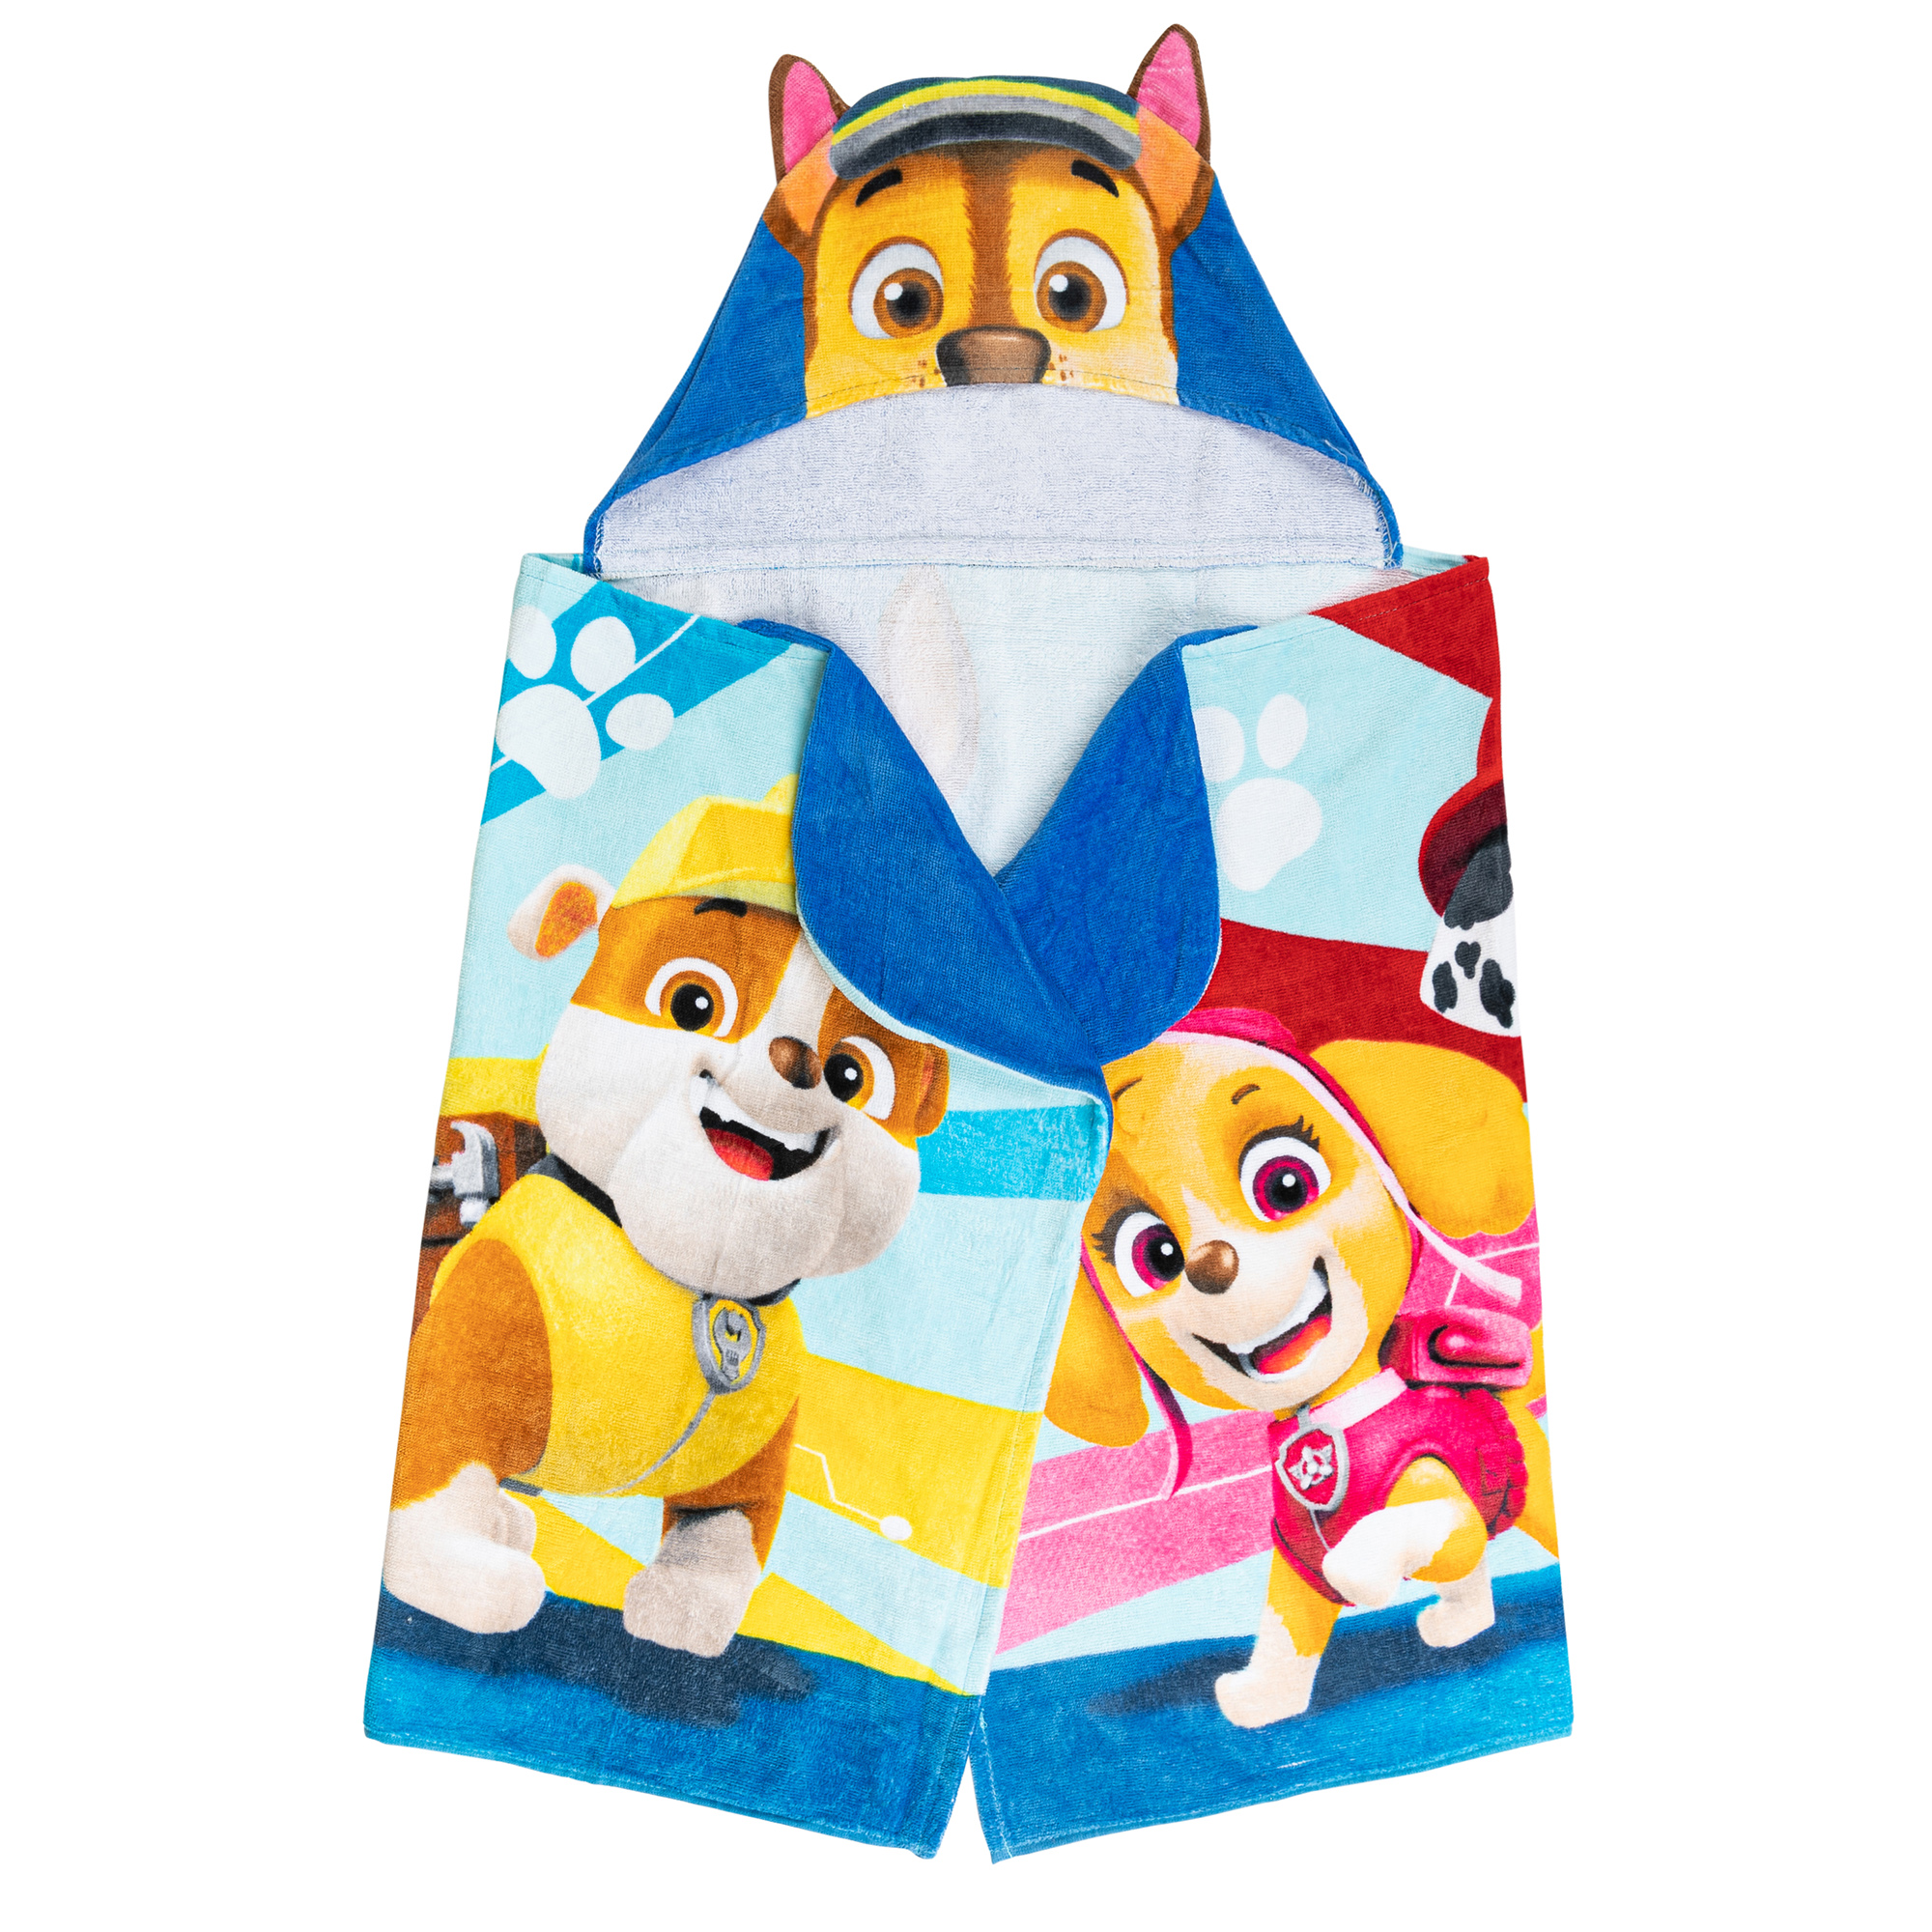 PAW Patrol Chase Kids Cotton Hooded Towel - image 1 of 6